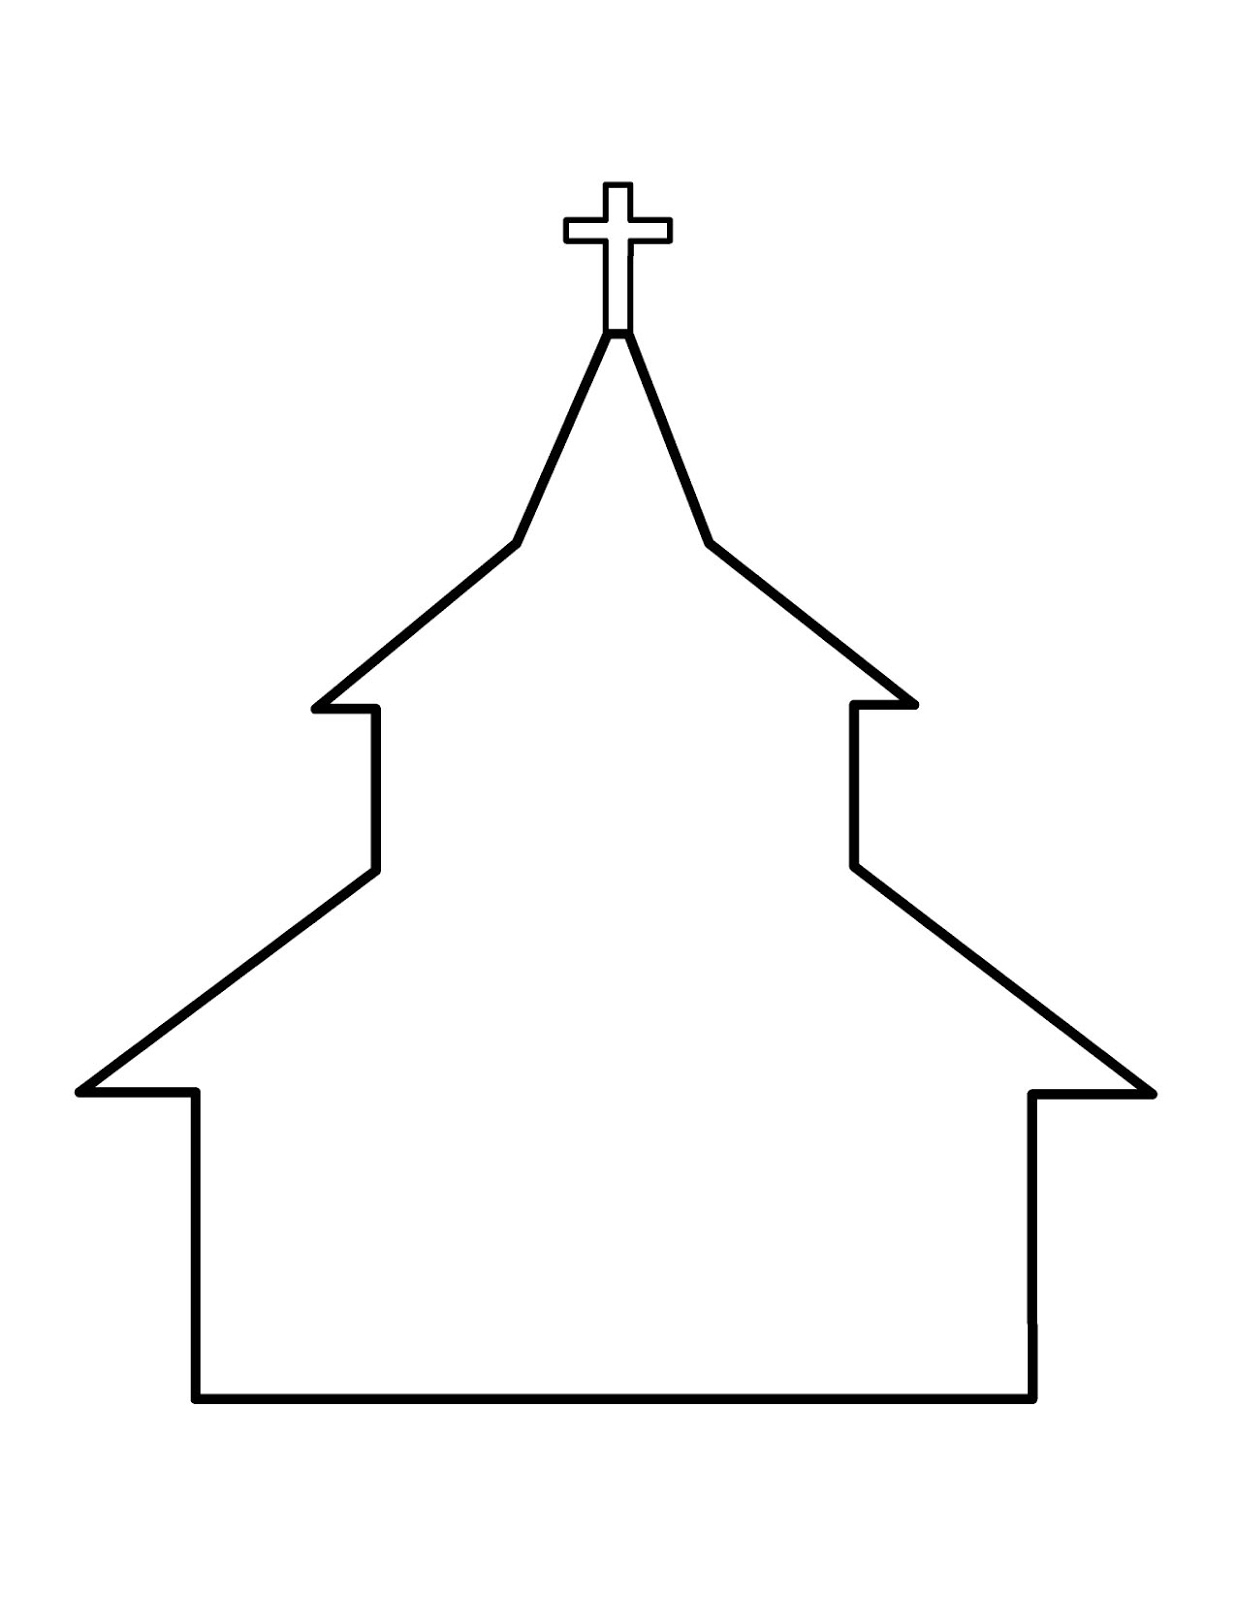 Download Greene Street Letters: Church - Fill In The Blanks